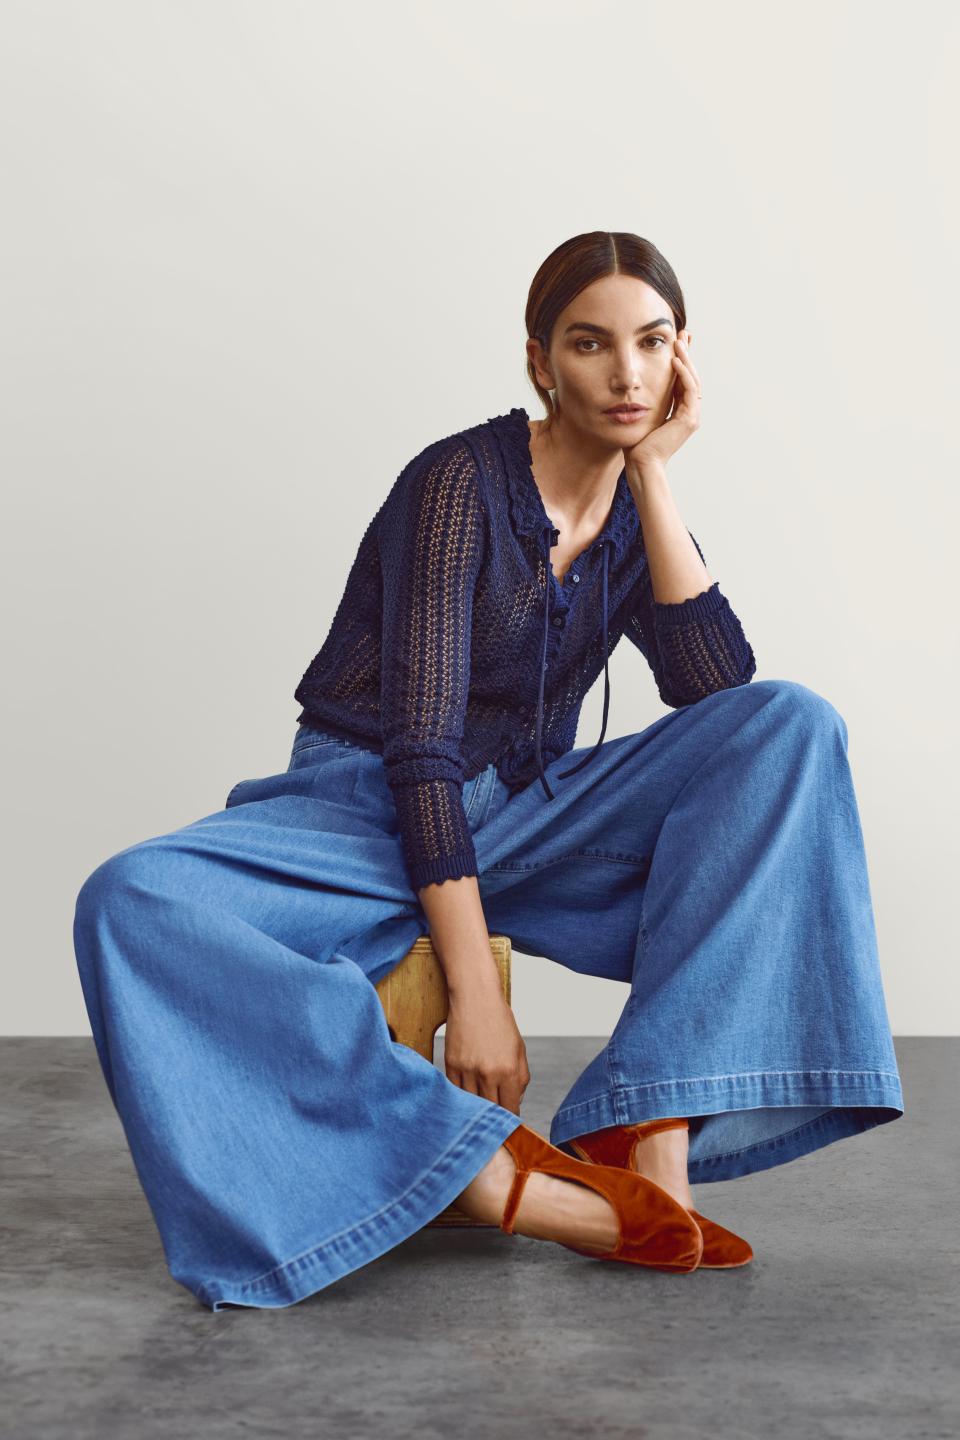 Lily Aldridge wears the Gap x Doen collaboration while sitting in front of a plain backdrop